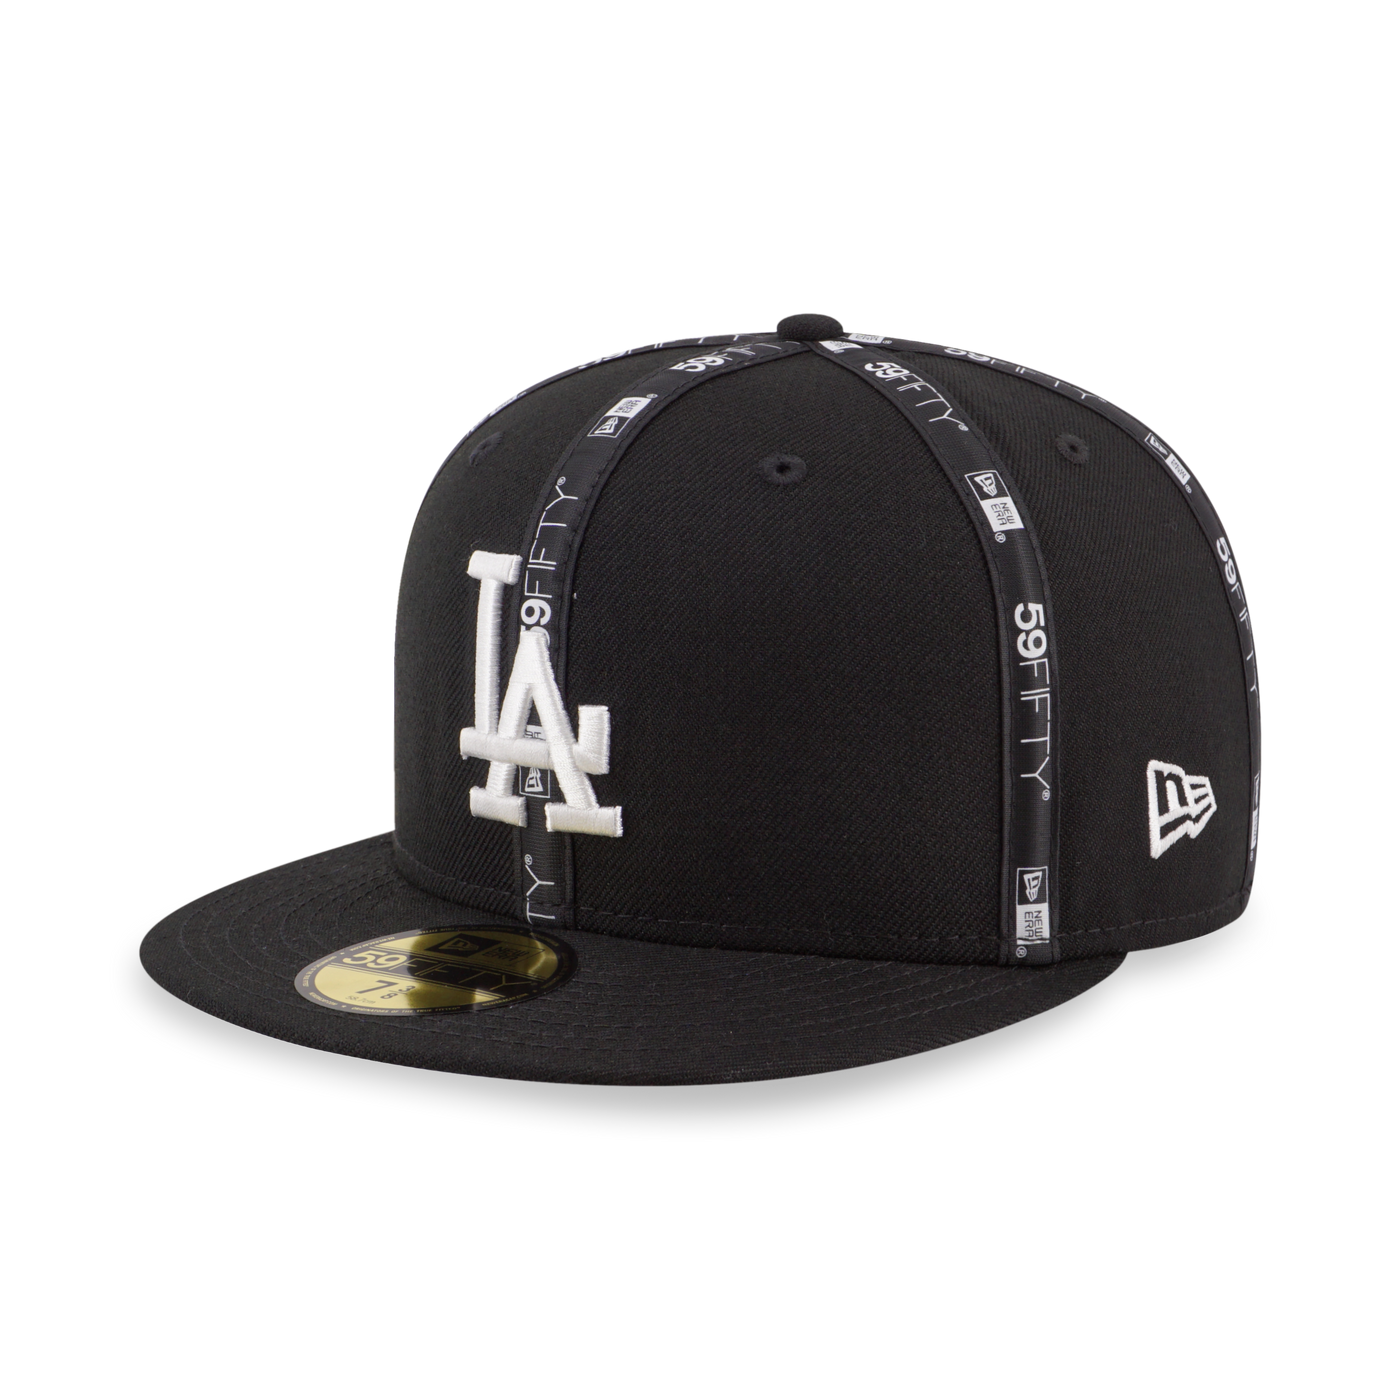 LOS ANGELES DODGERS INSIDE OUT DODGERS BLACK 59FIFTY CAP